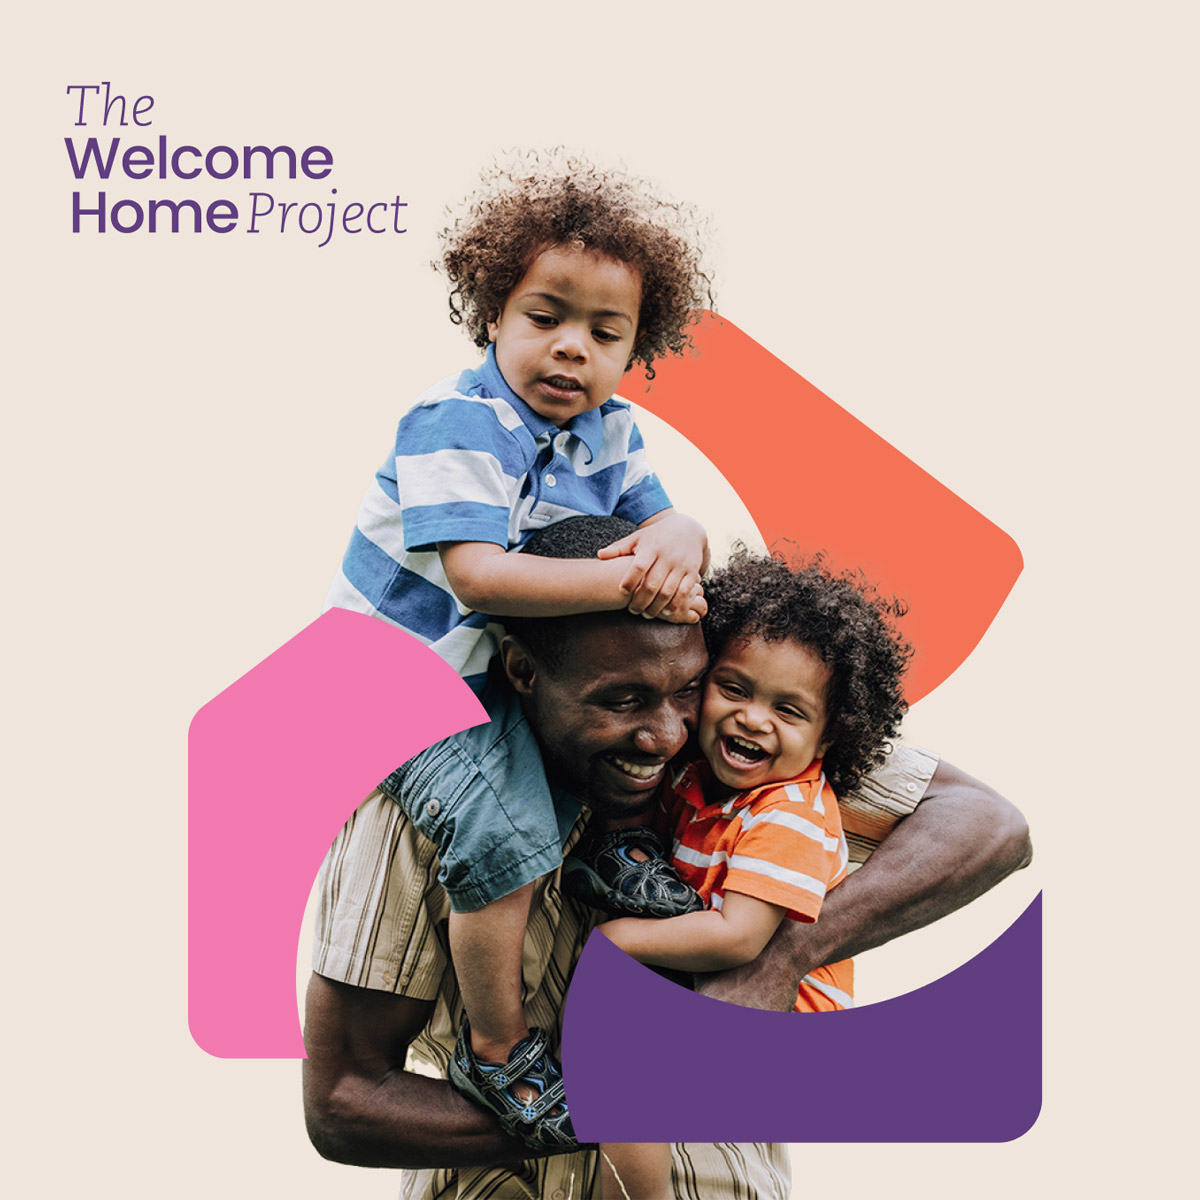 The Welcome Home Project